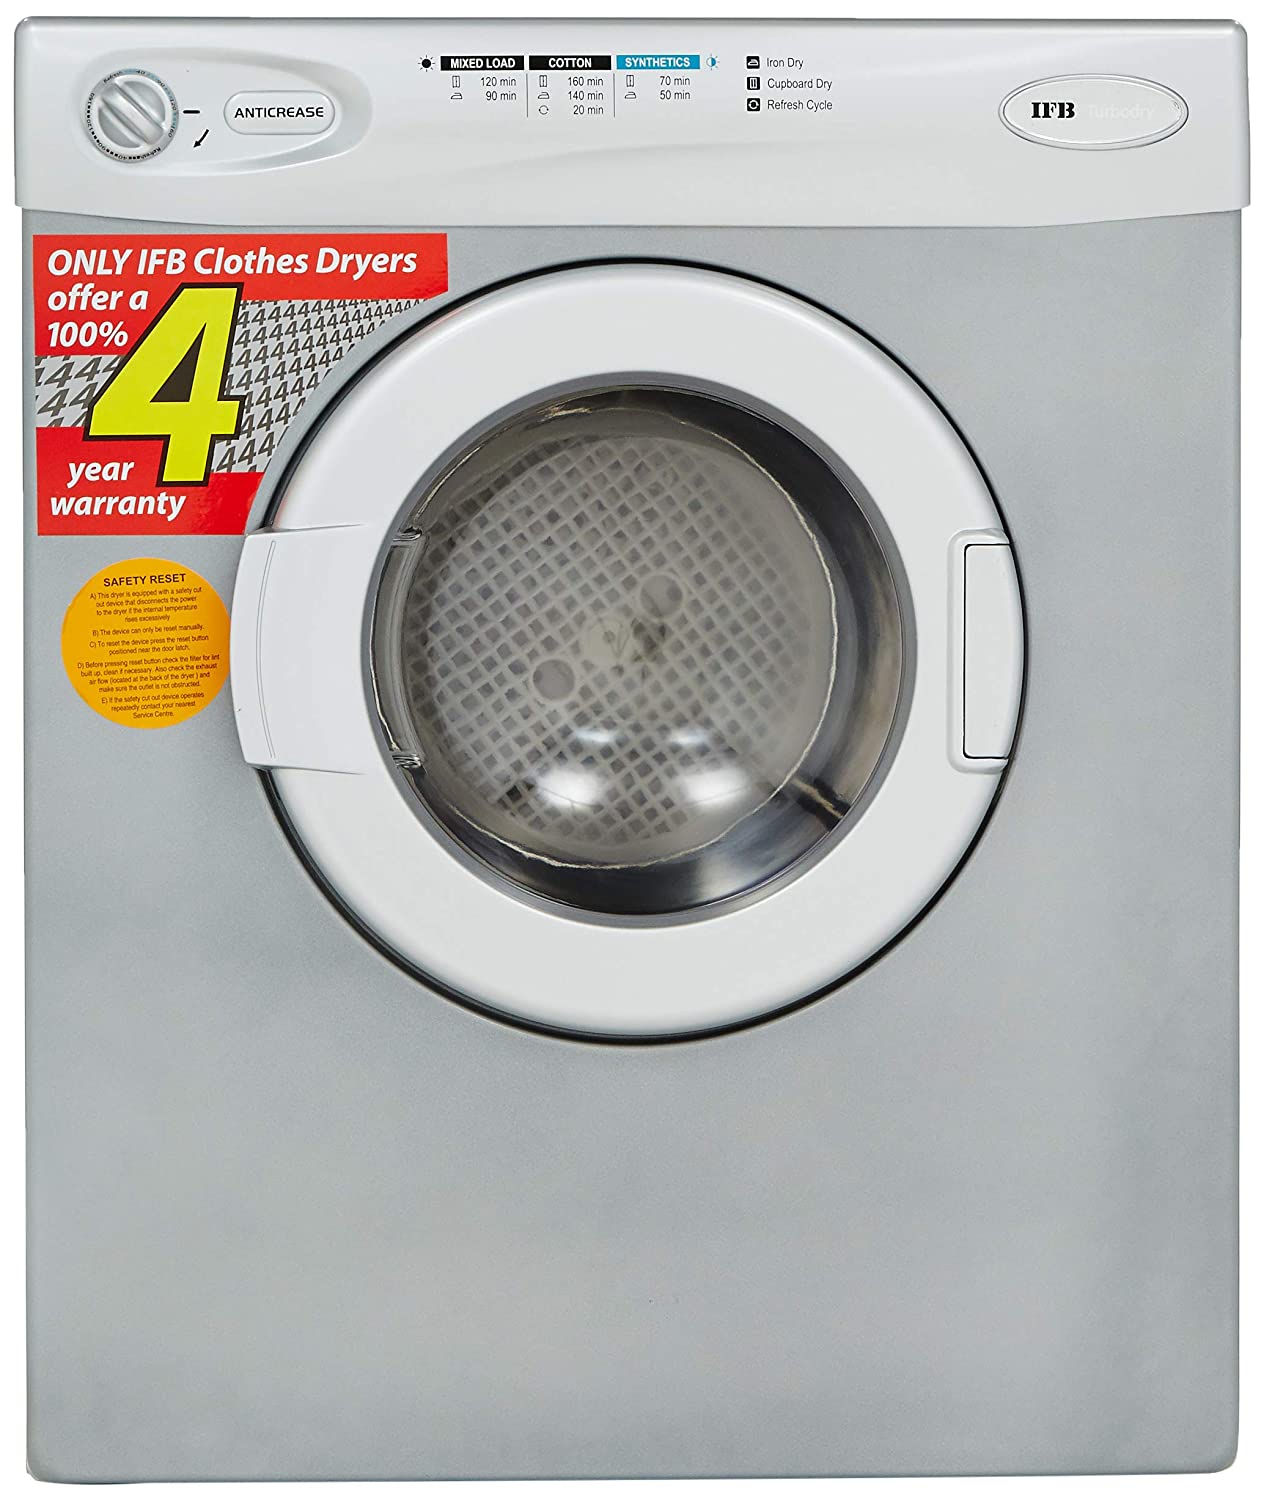 IFB 5.5 kg Fully-automatic Dryer (TURBO DRY EX, Silver, Wall